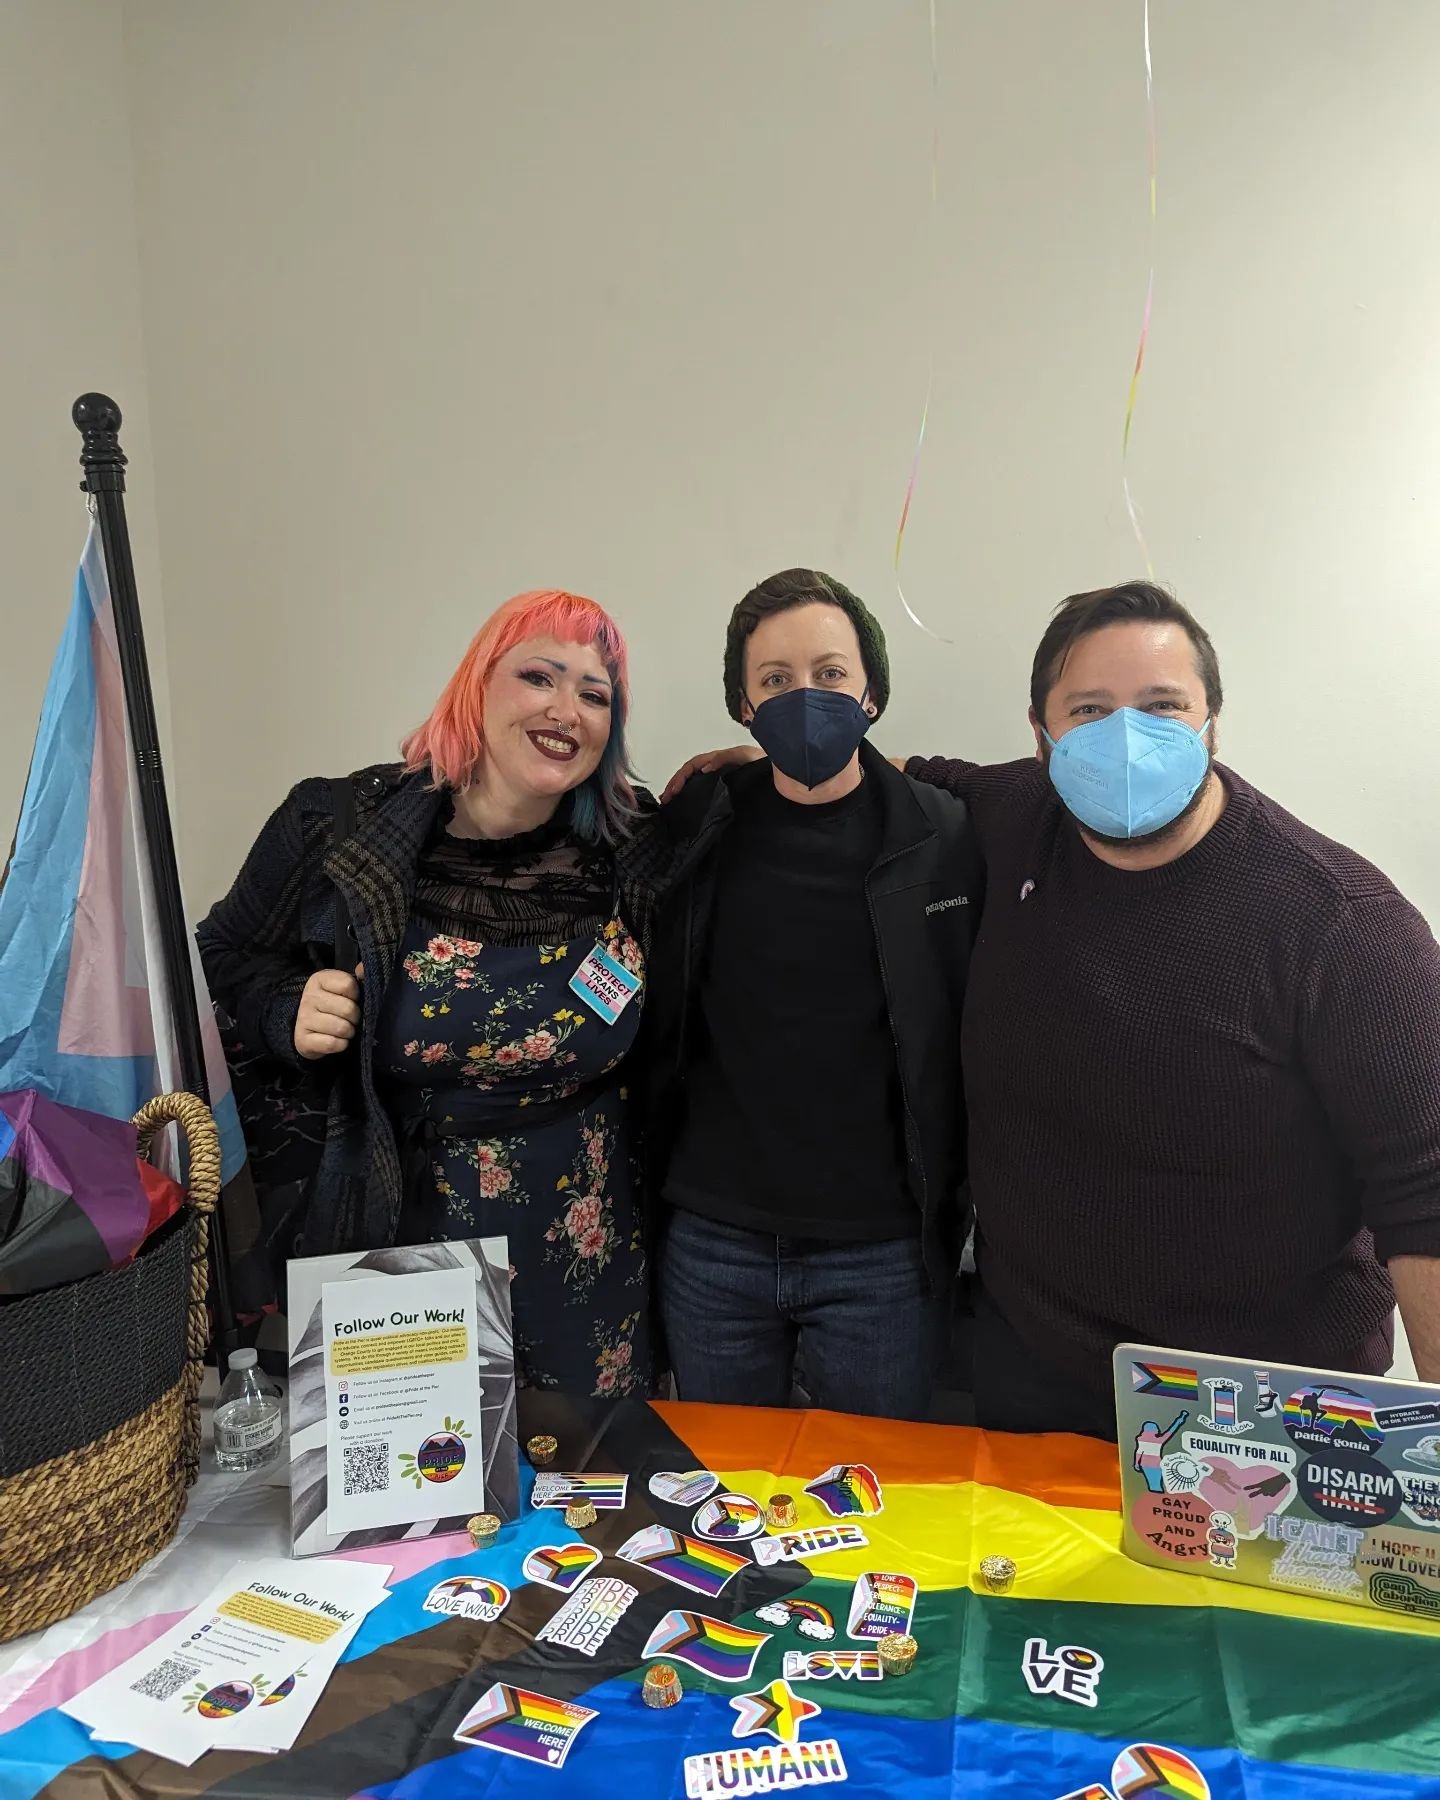 What a busy week of tabling it's been! We were so happy to meet so many of you today at the Trans Day of Visibility event that the @lgbtqcenteroc put on.  The community events like this are so filled with joy and connection - two things that are key 